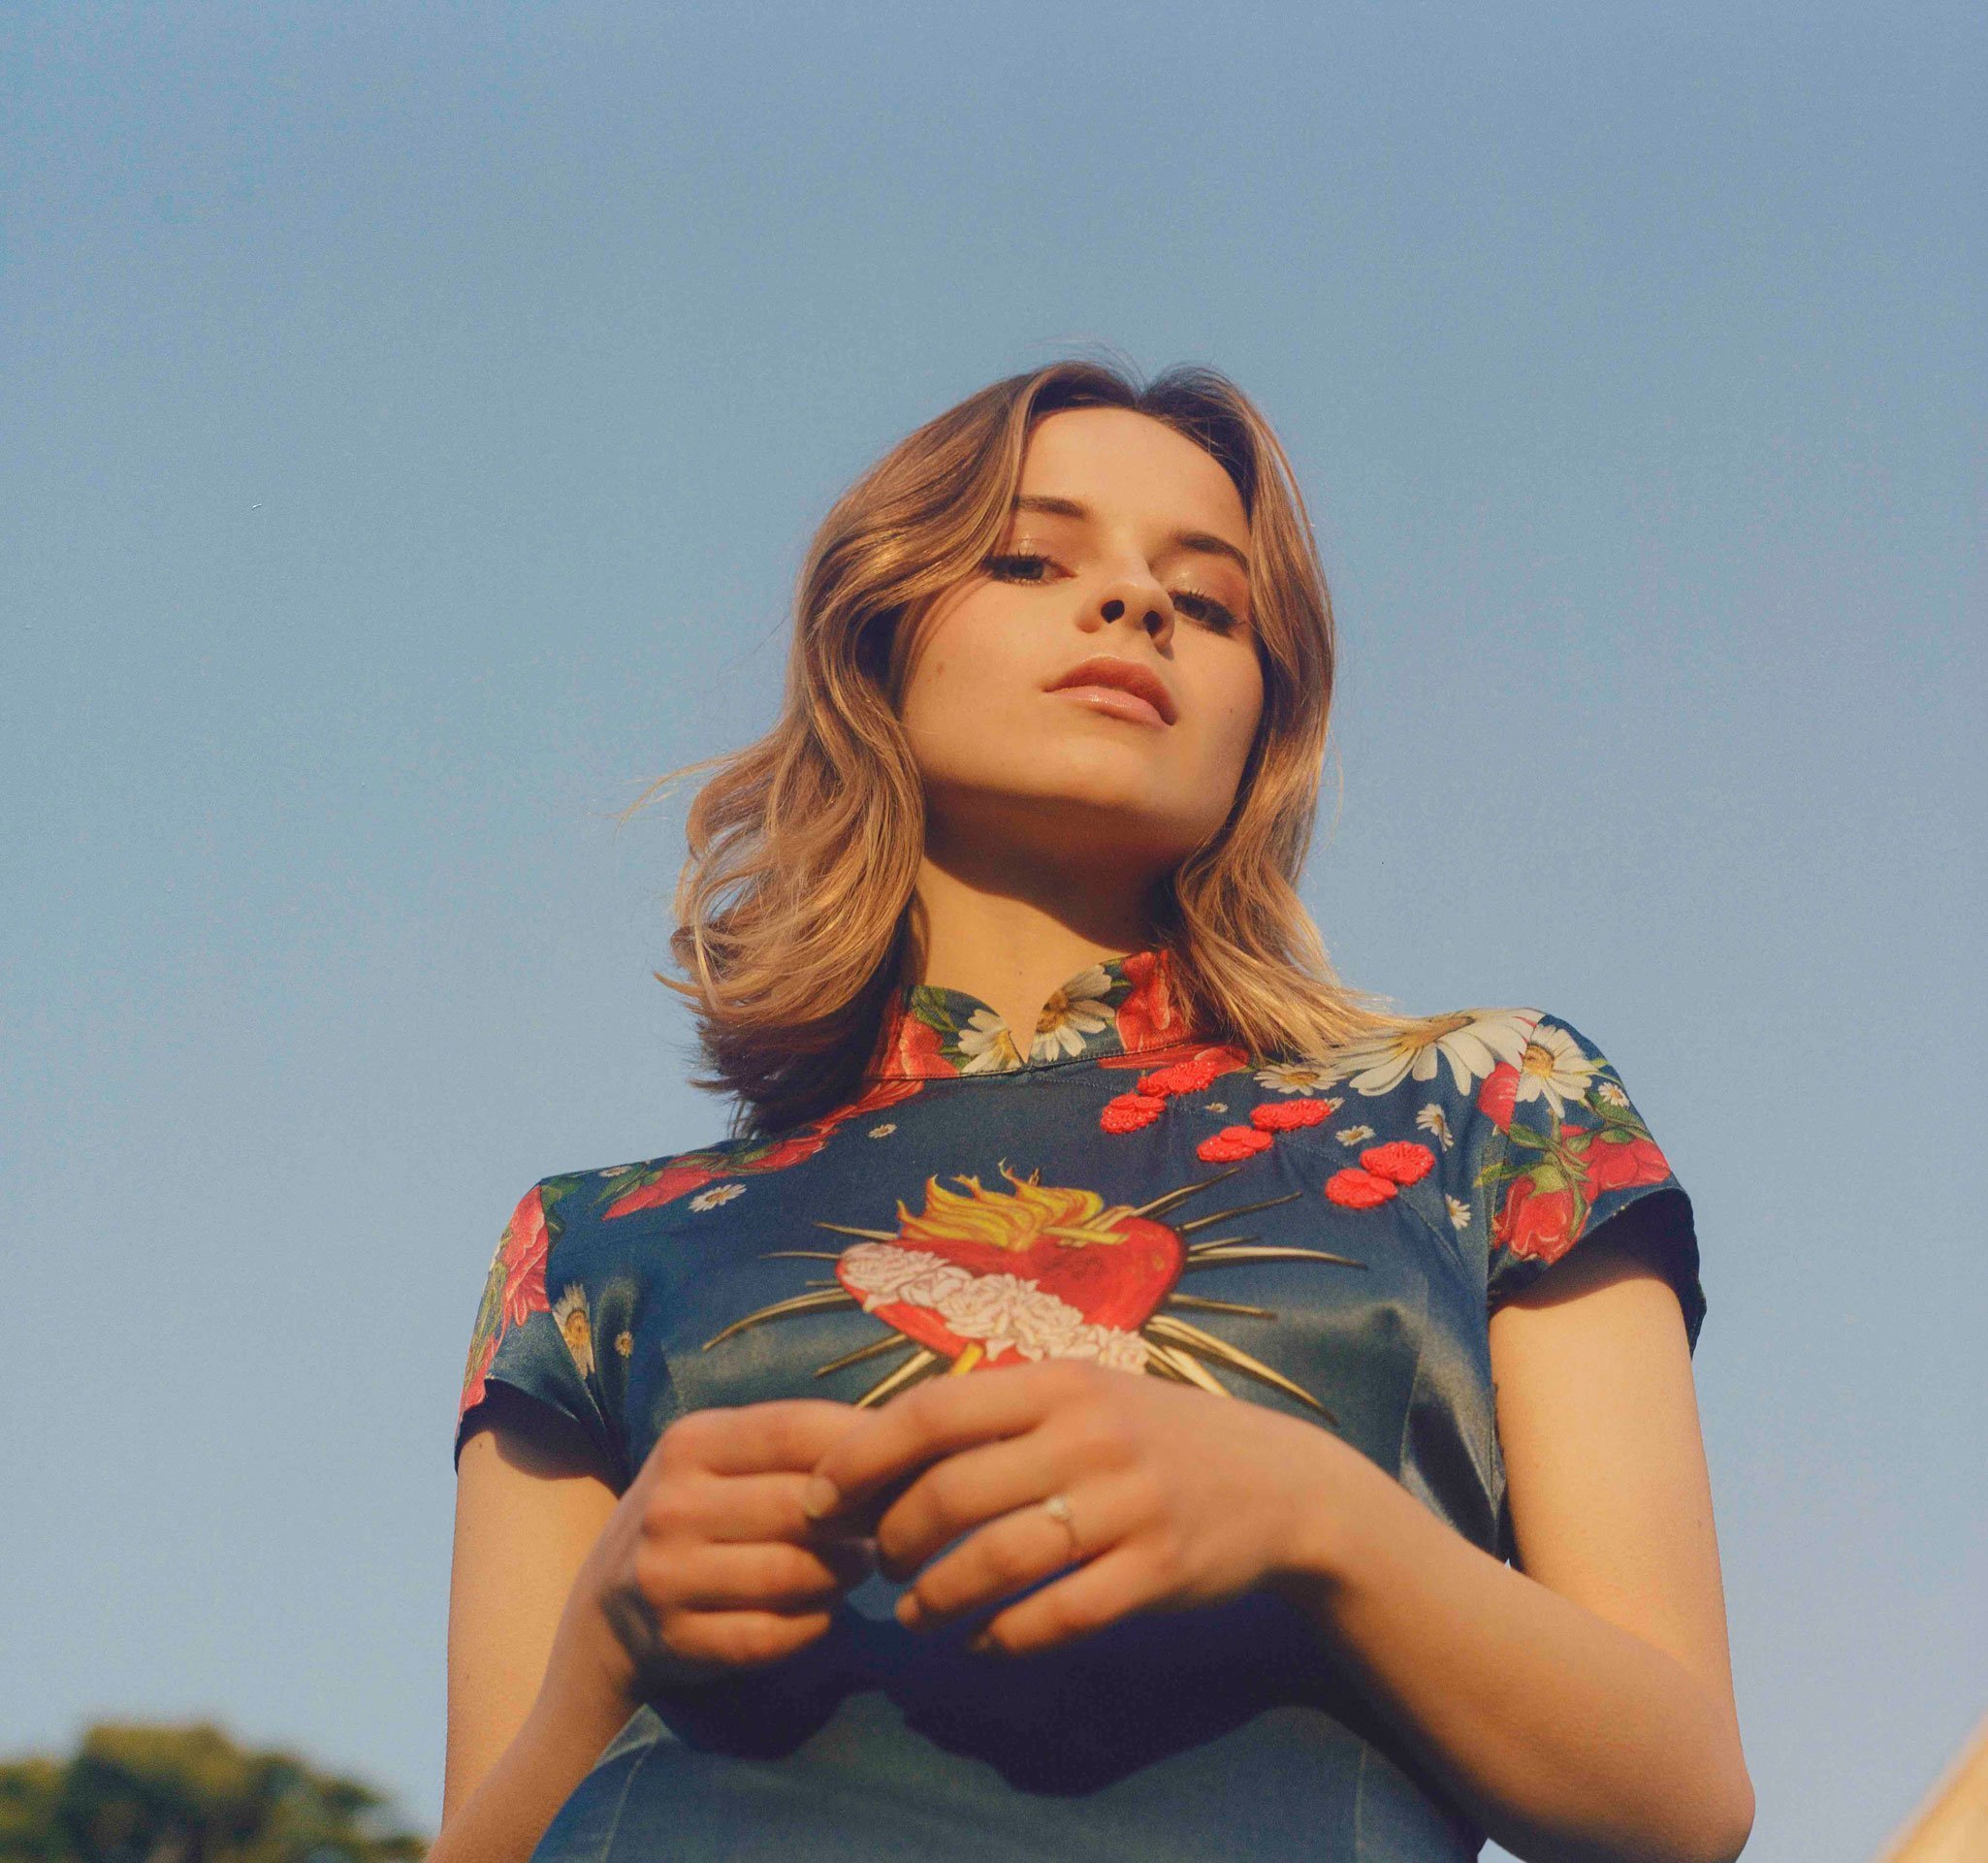 GABRIELLE APLIN returns to Belfast with a headline show at The Limelight 1, Monday 9th March 2020 